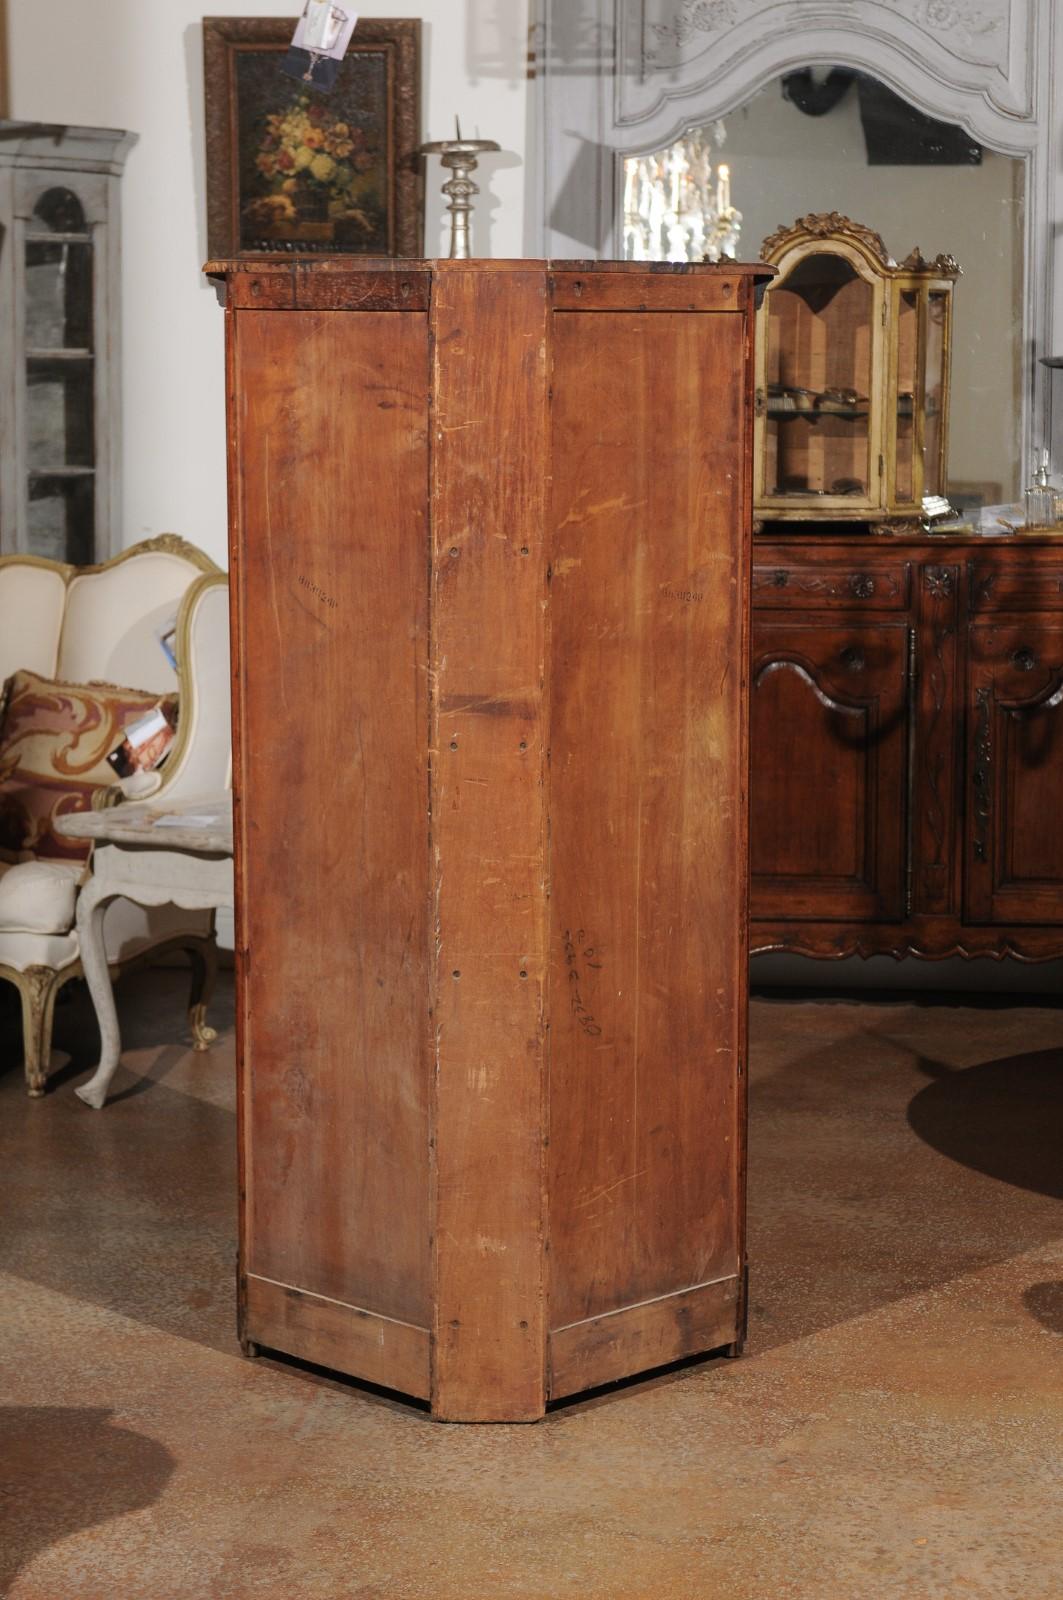 Early 20th Century American Cherry Corner Cabinet with Shelves and Single Door 6